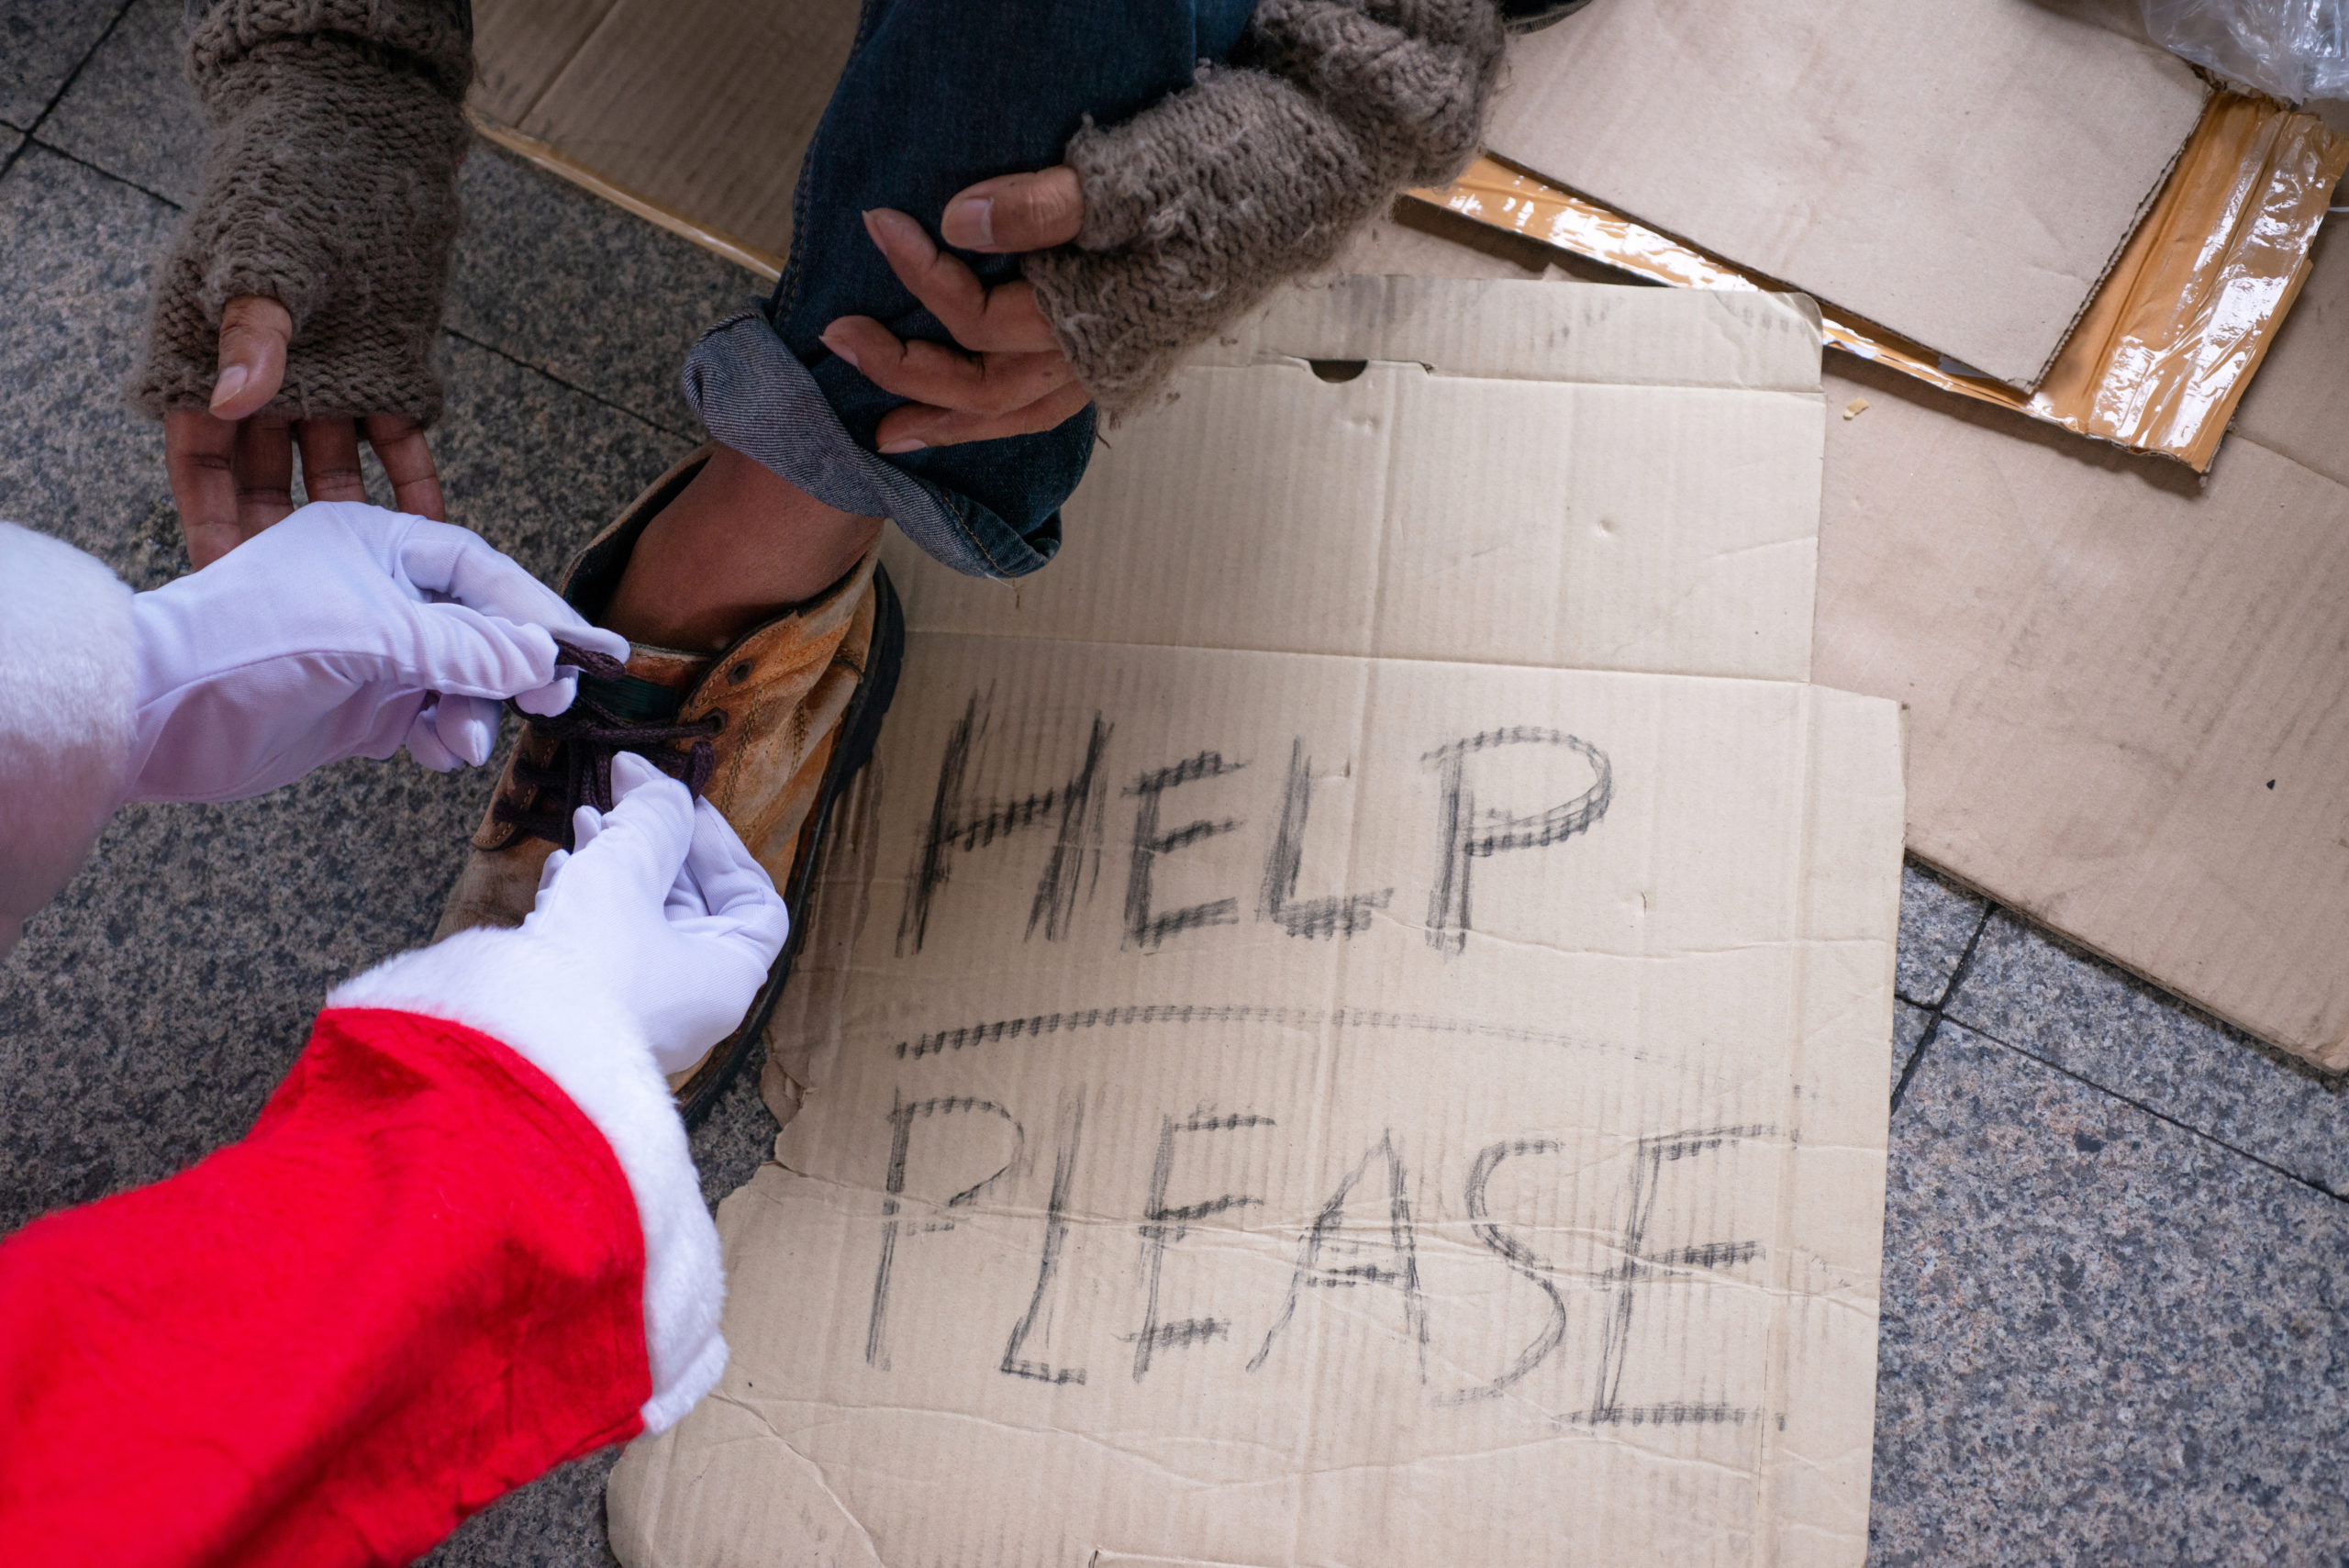 Santa tied the shoe rope to the homeless, help the homeless, homeless christmas